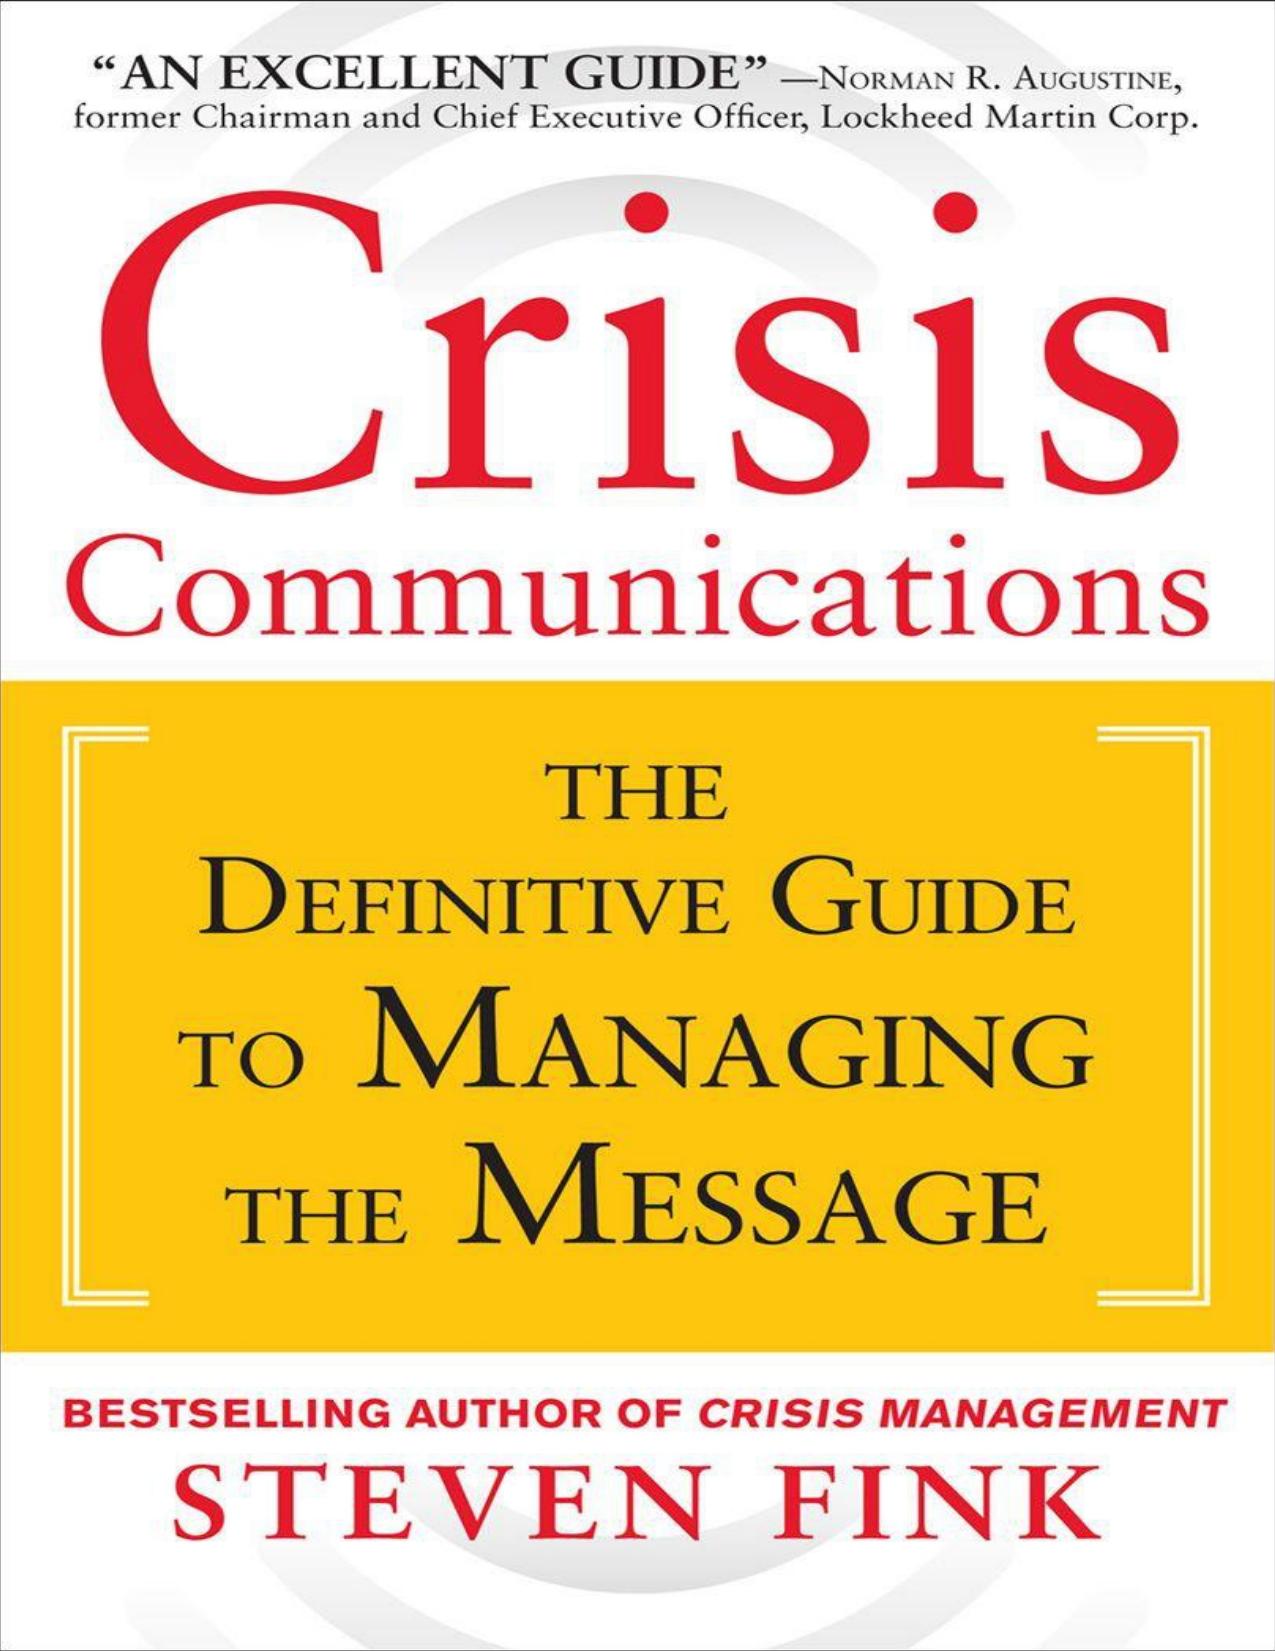 Crisis Communications_ The Definitive Guide to Managing the Mege_ The Definitive Guide to Managing the Message - Steven Fink.jpg